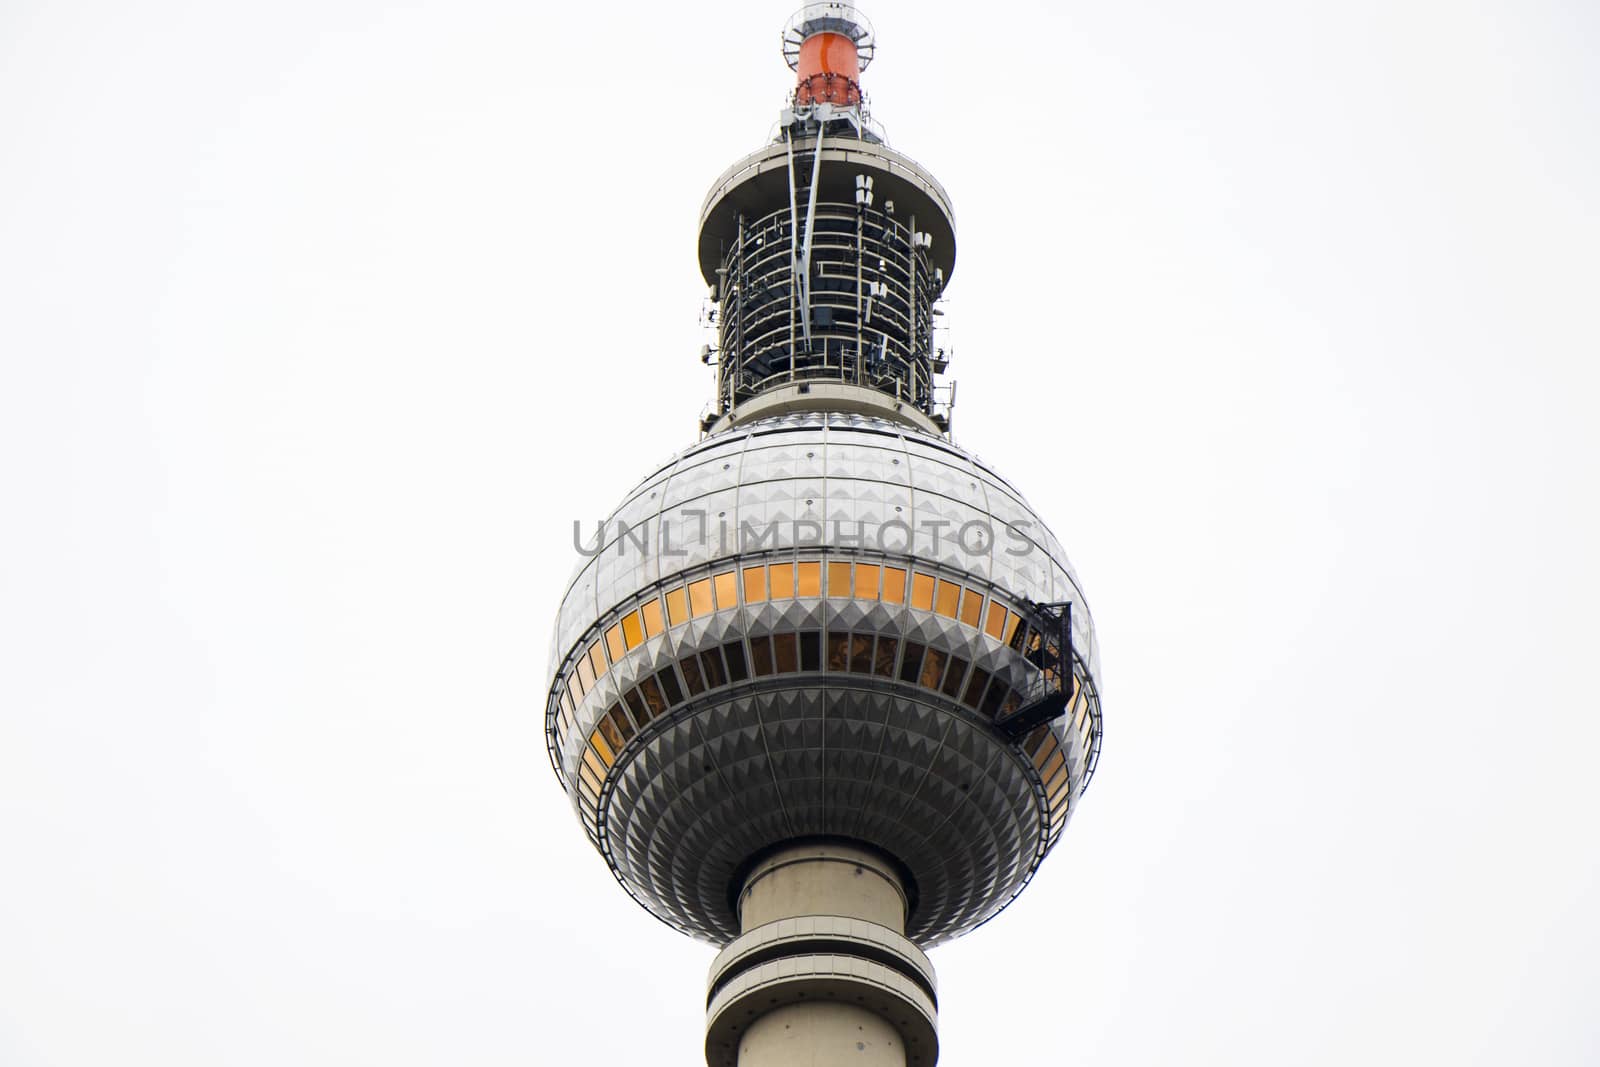 TV tower famous landmark and architecture in Berlin, Germany by Taidundua